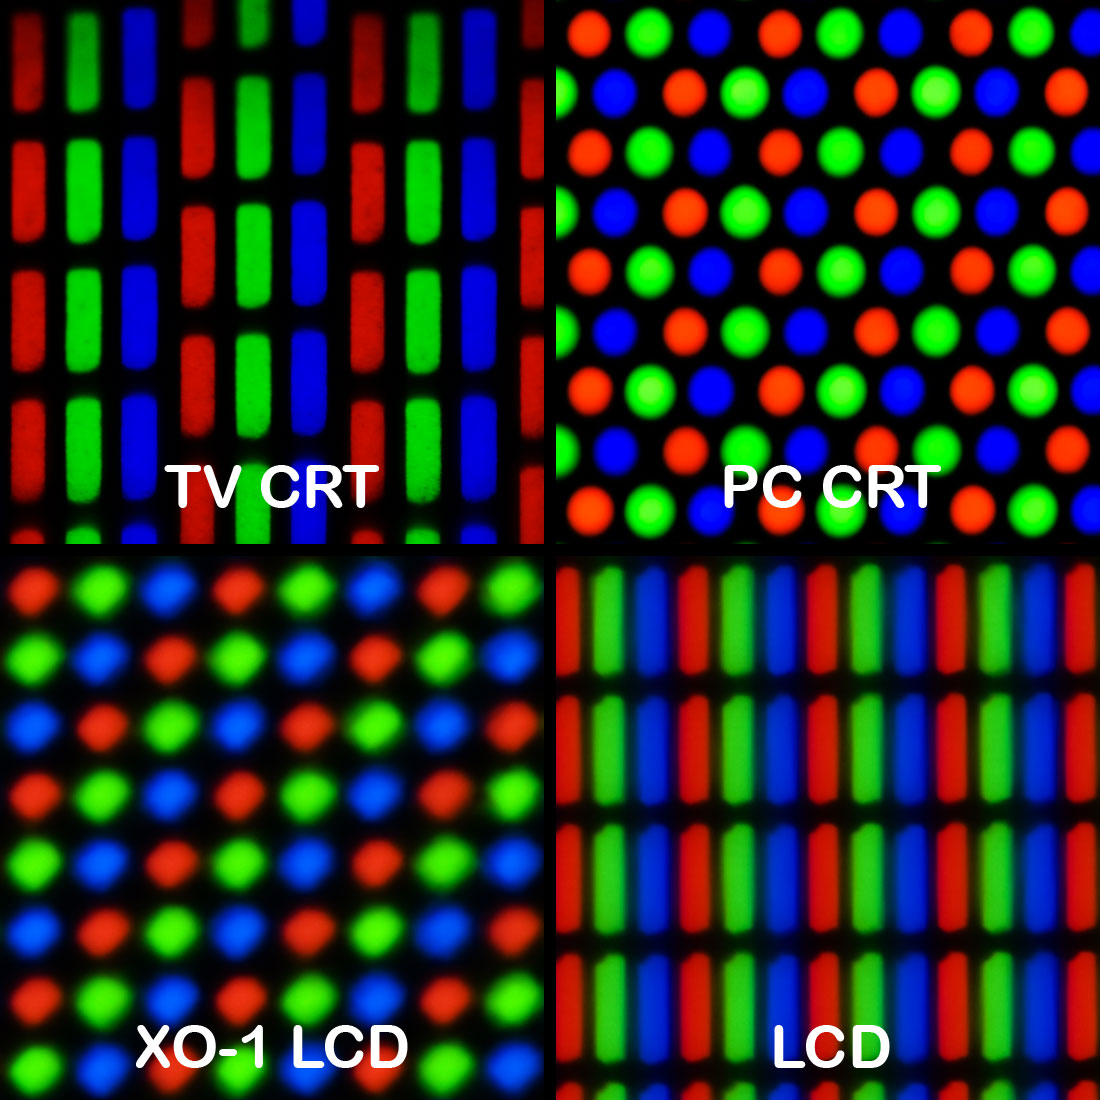 Four images, each representing the hardware RGB pixels of four kinds of displays (TV CRT, PC CRT, XO-1 LCD and LCD). None of them have square pixel geometry.